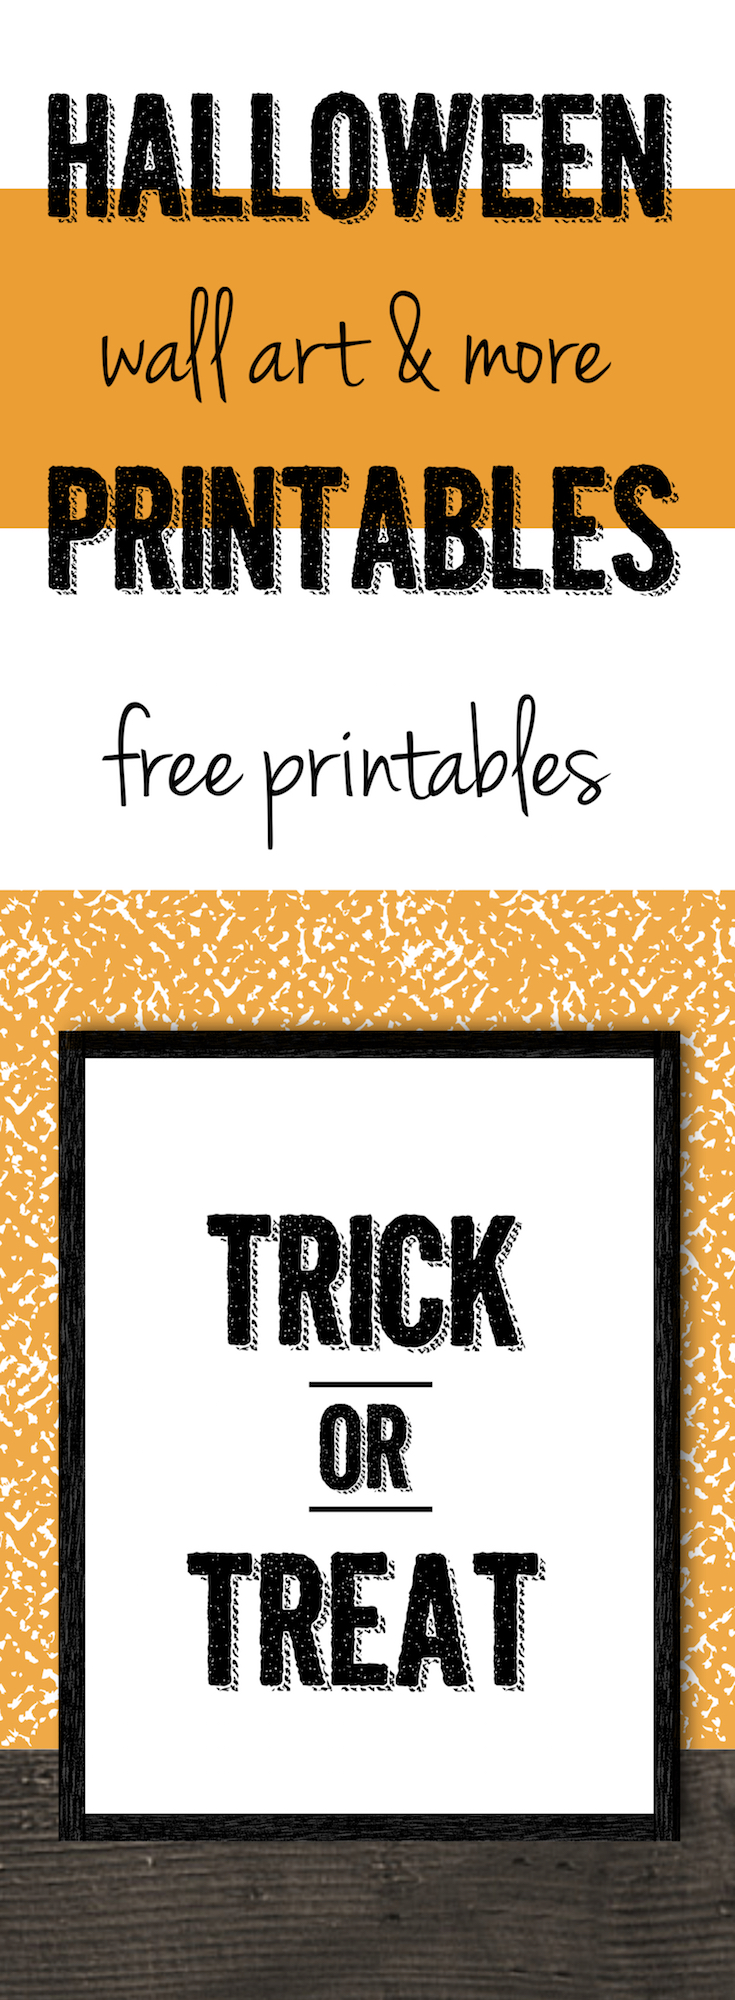 Halloween Trick or Treat Free Printable. Print this wall art decor for a fun festive and spooky Halloween. Cute and easy Halloween decoration.